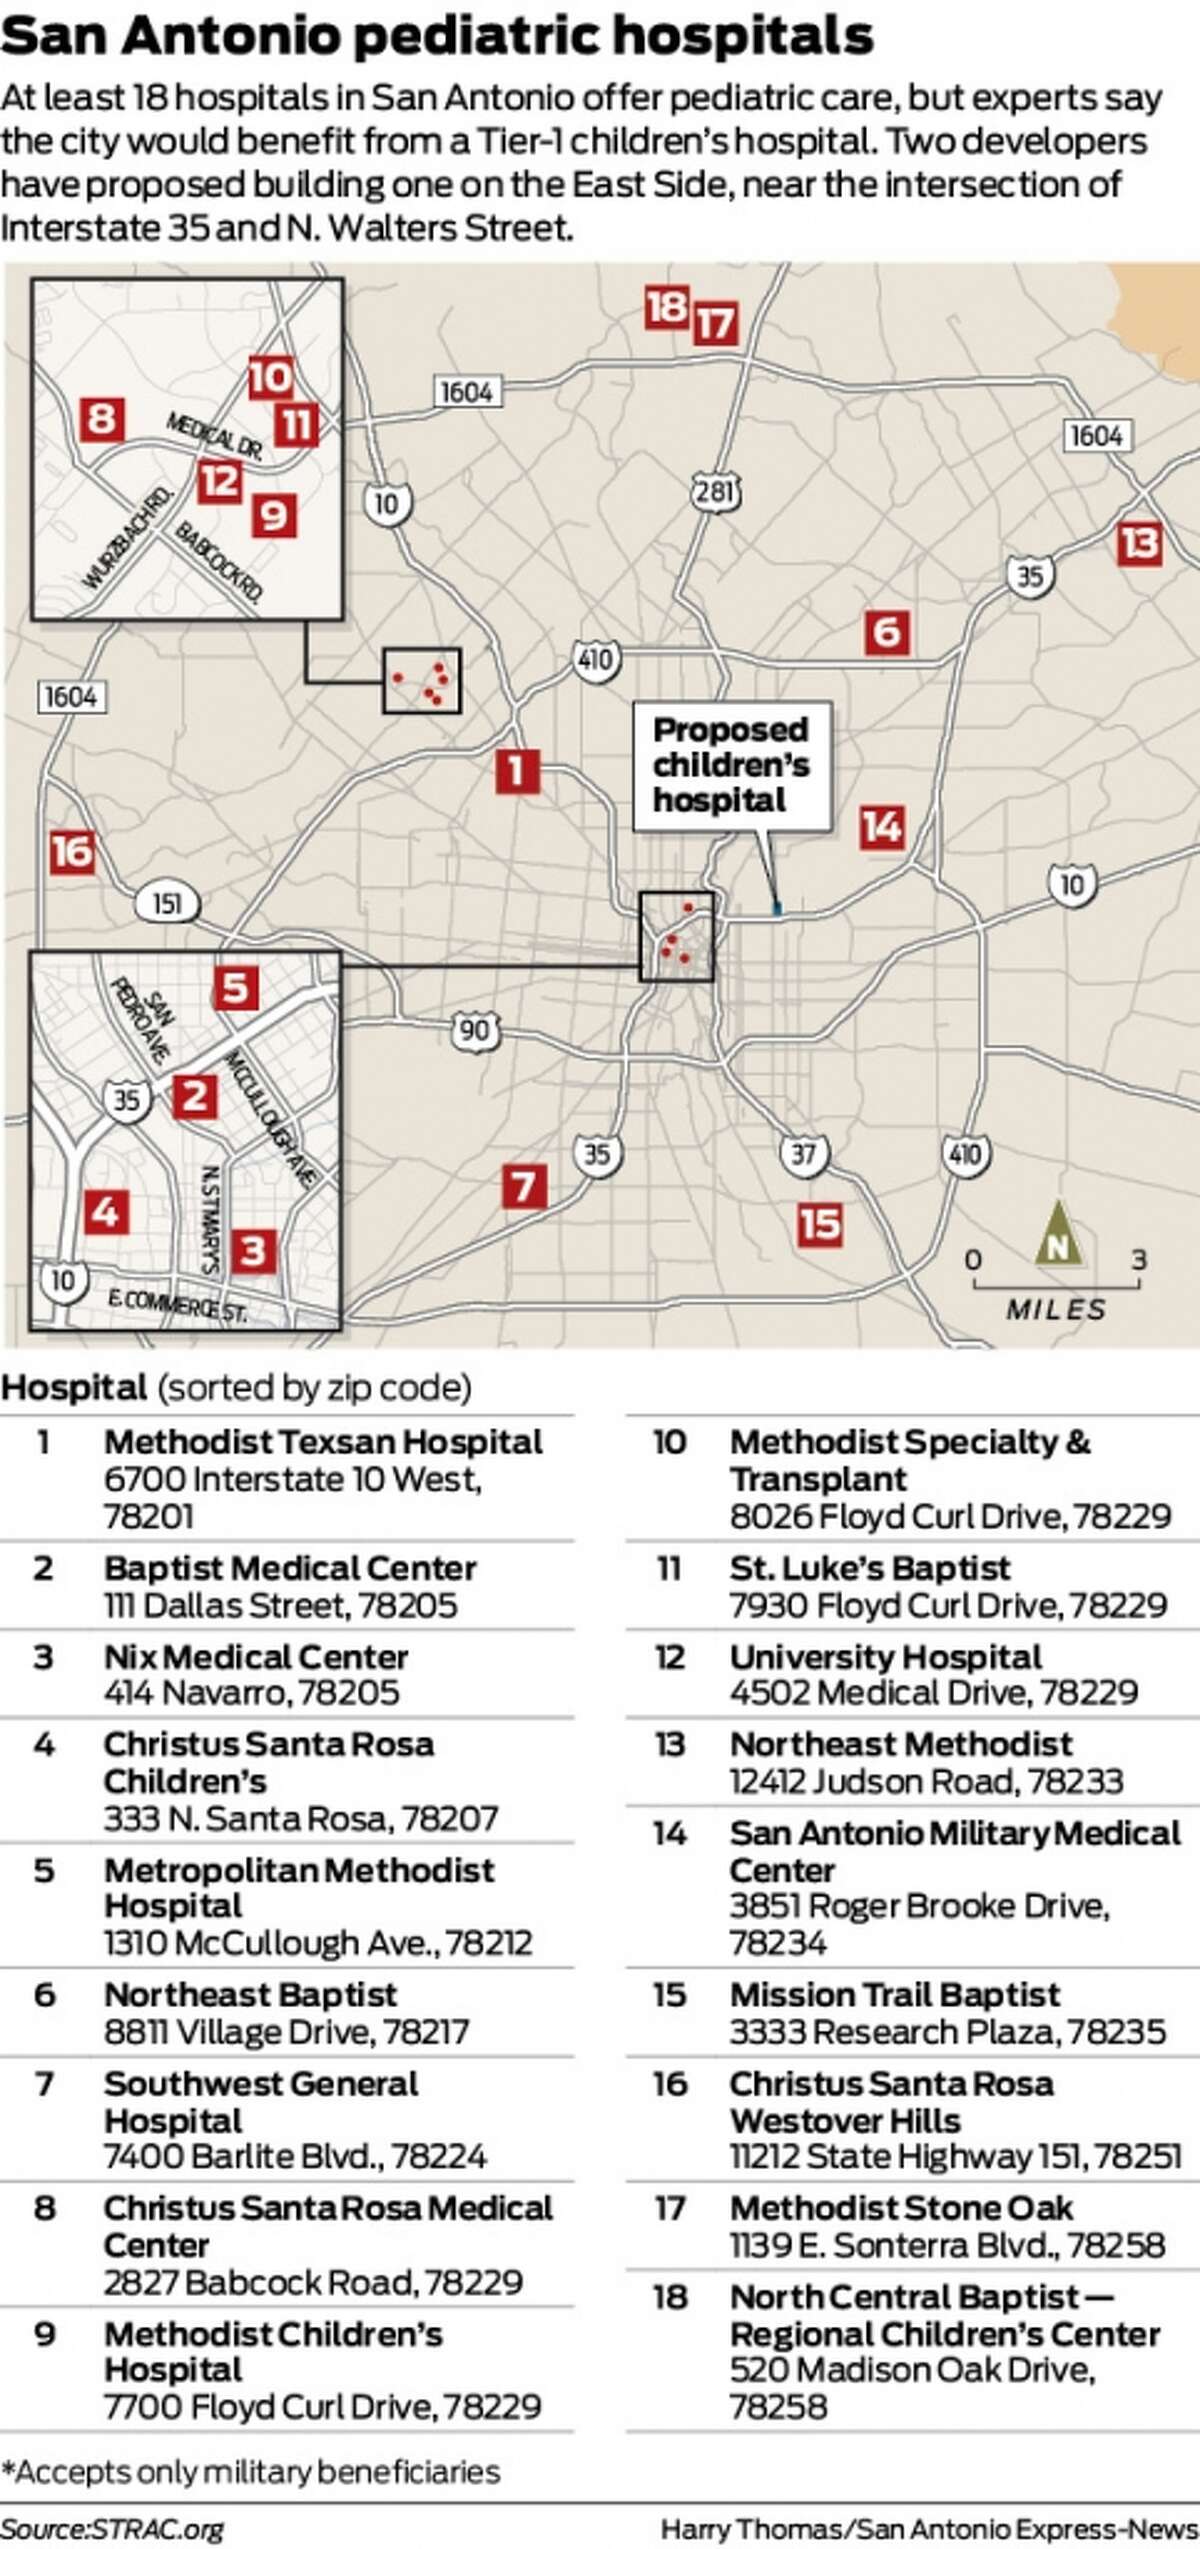 At least 18 hospitals in San Antonio offer pediatric care, but experts say the city would benefit from a Tier-1 children’s hospital. Two developers have proposed building one on the East Side, near the intersection of Interstate 35 and N. Walters Street.